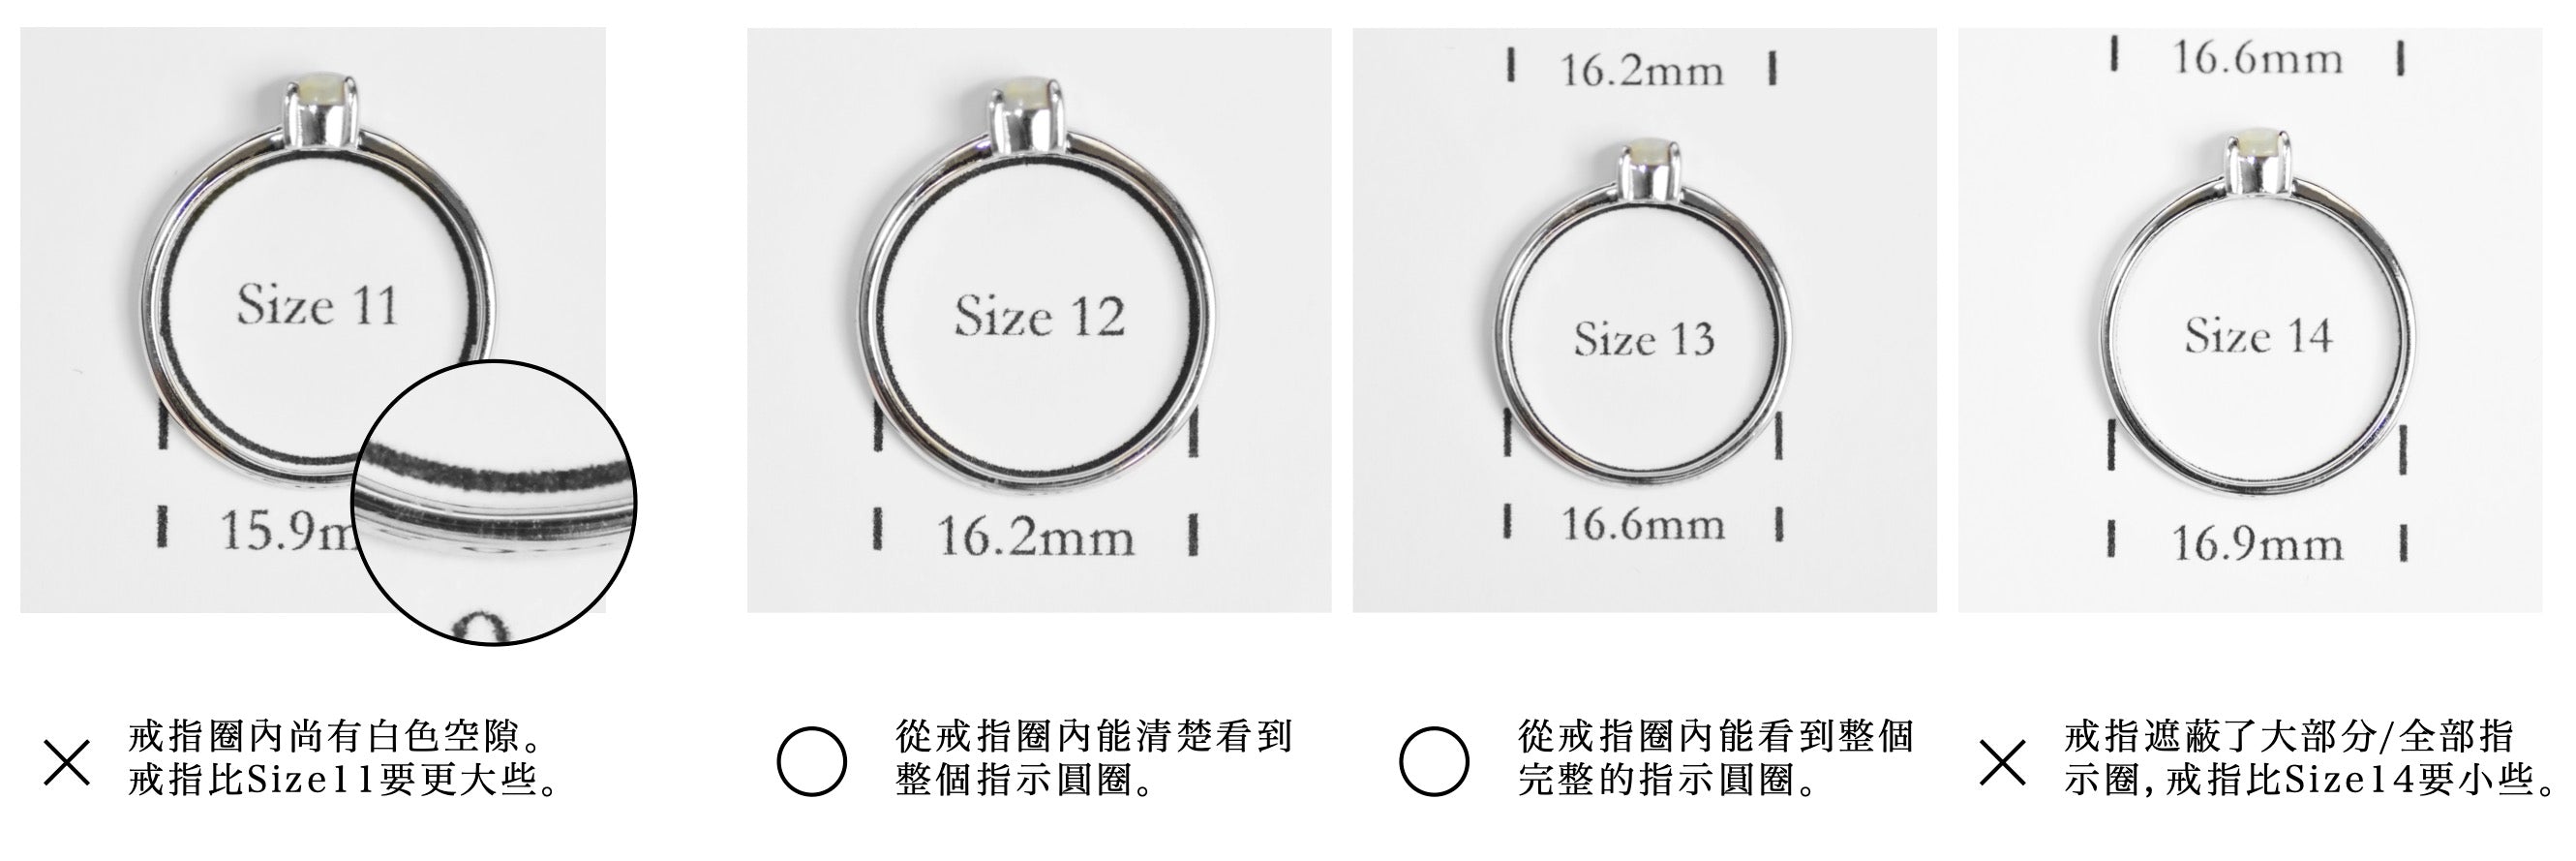 Look carefully when measuring your ring size